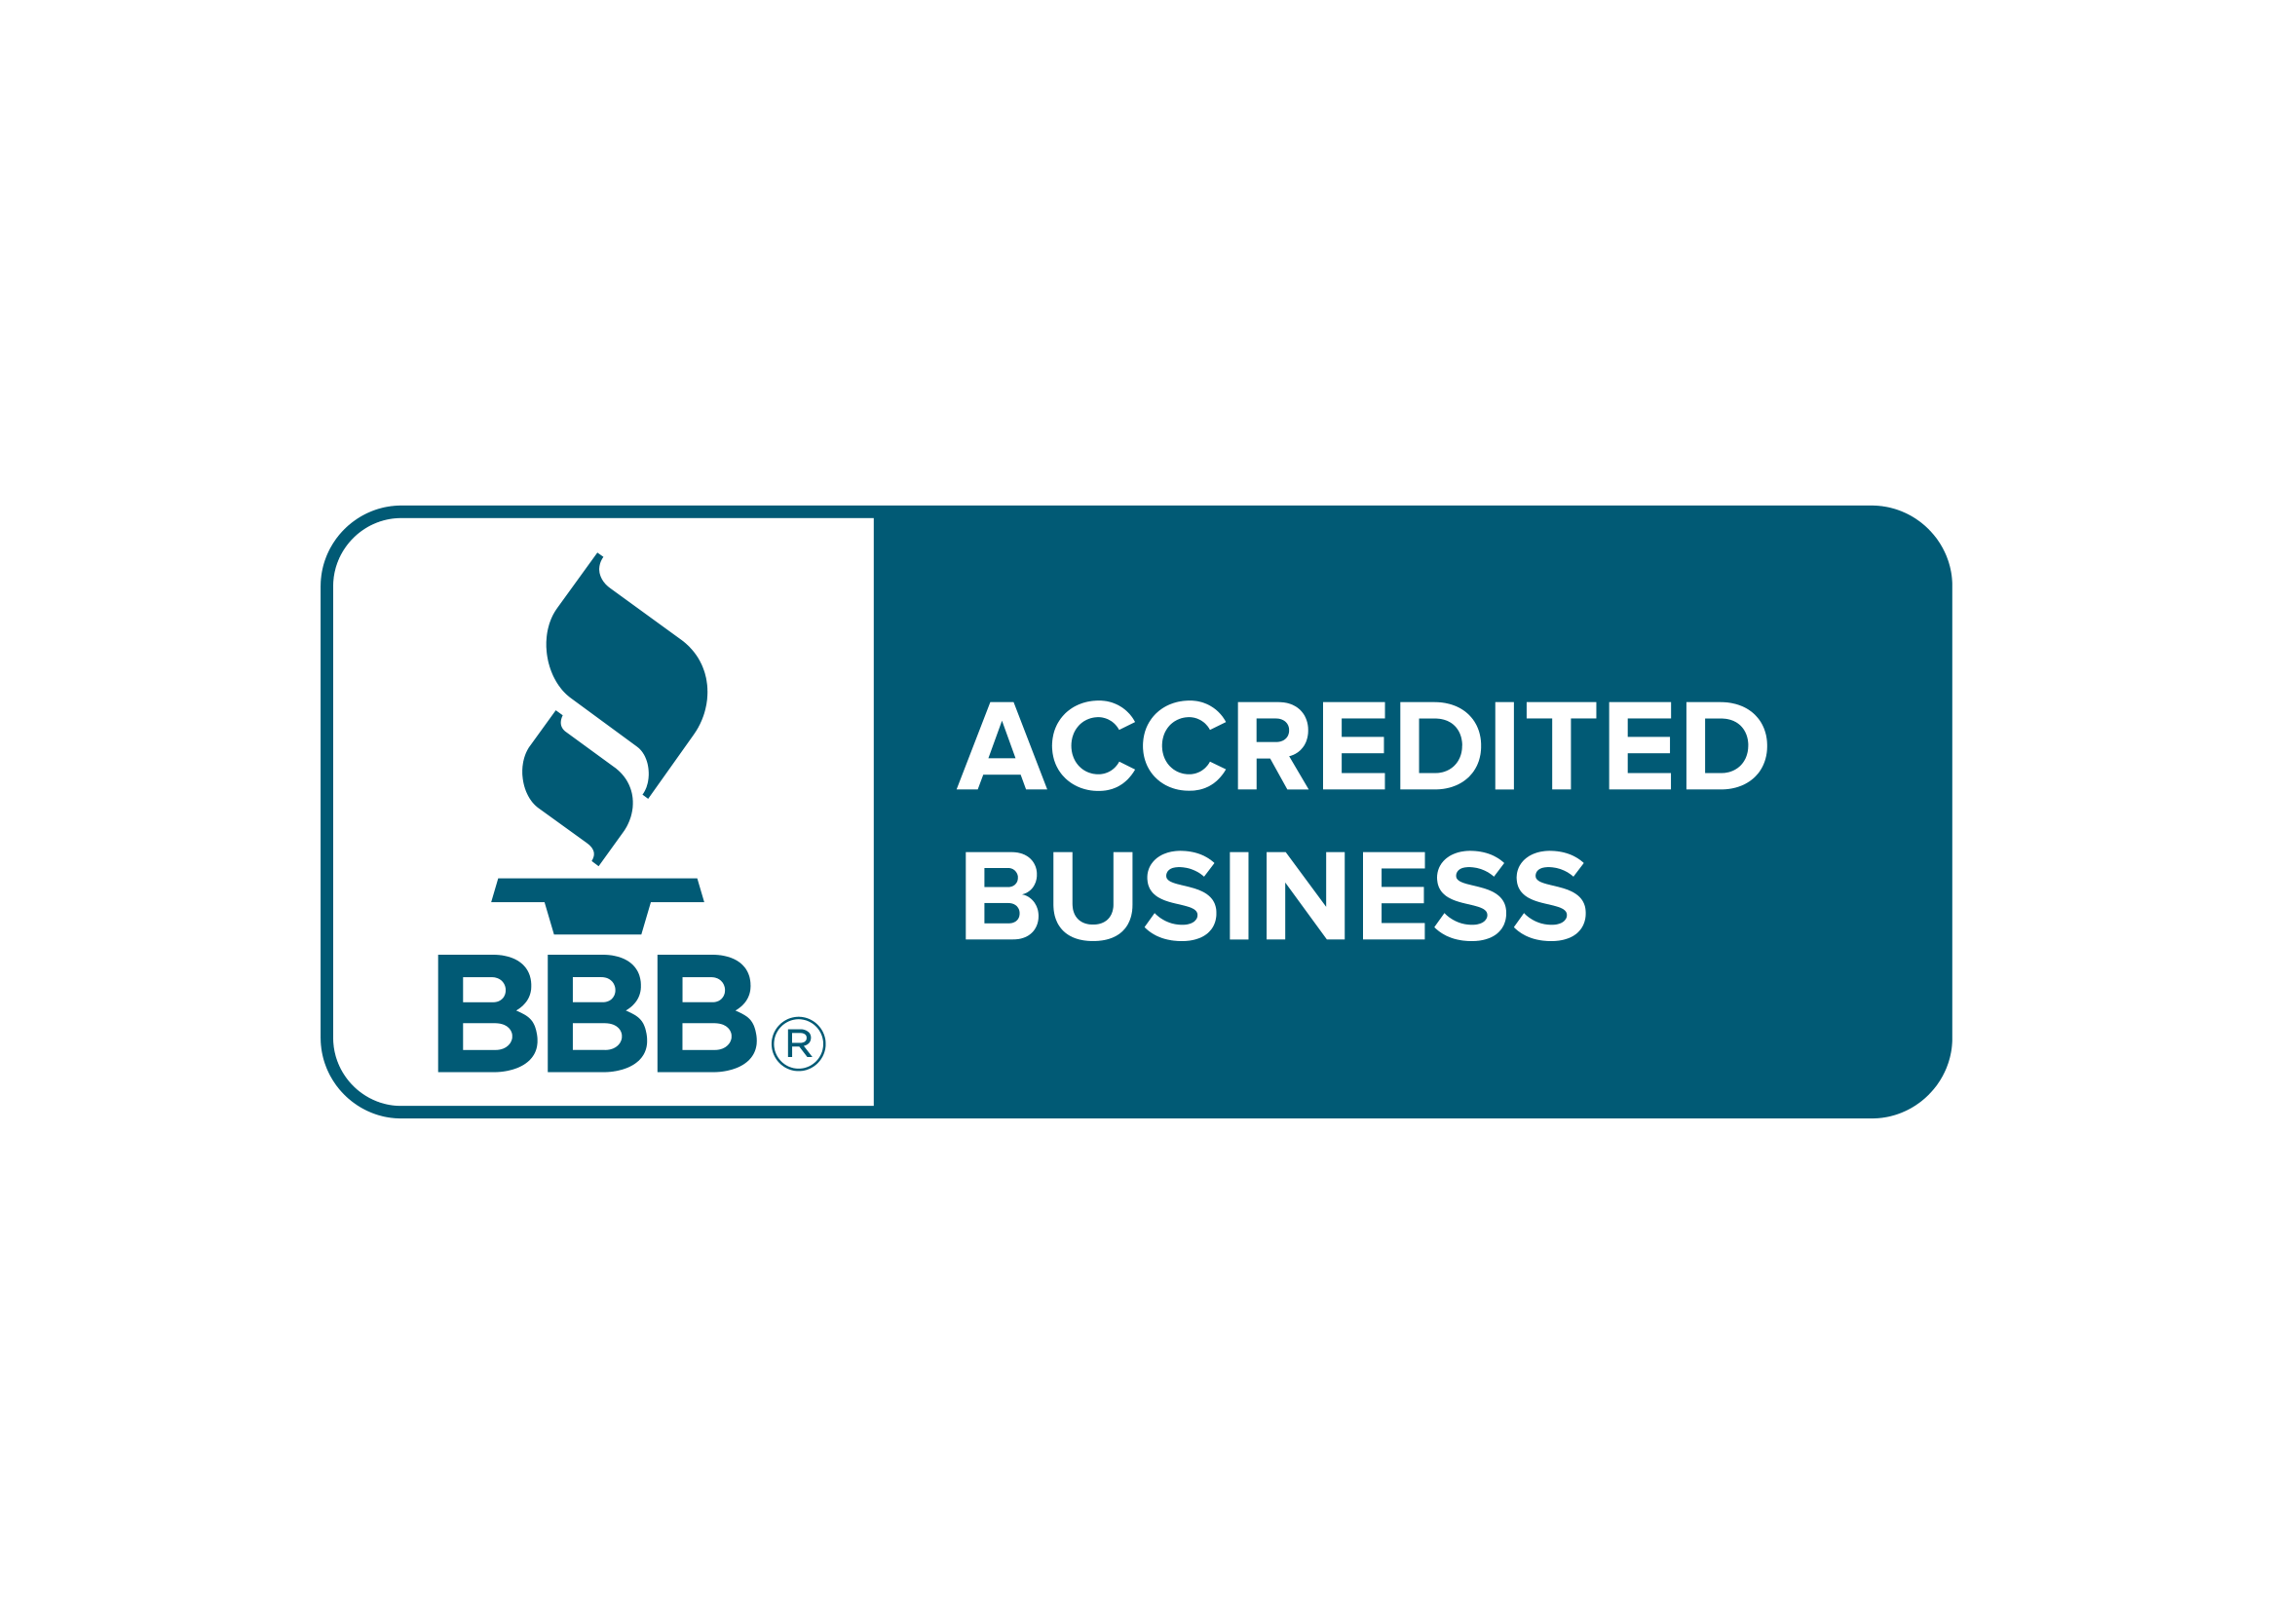 BBB Accredited Business (1)